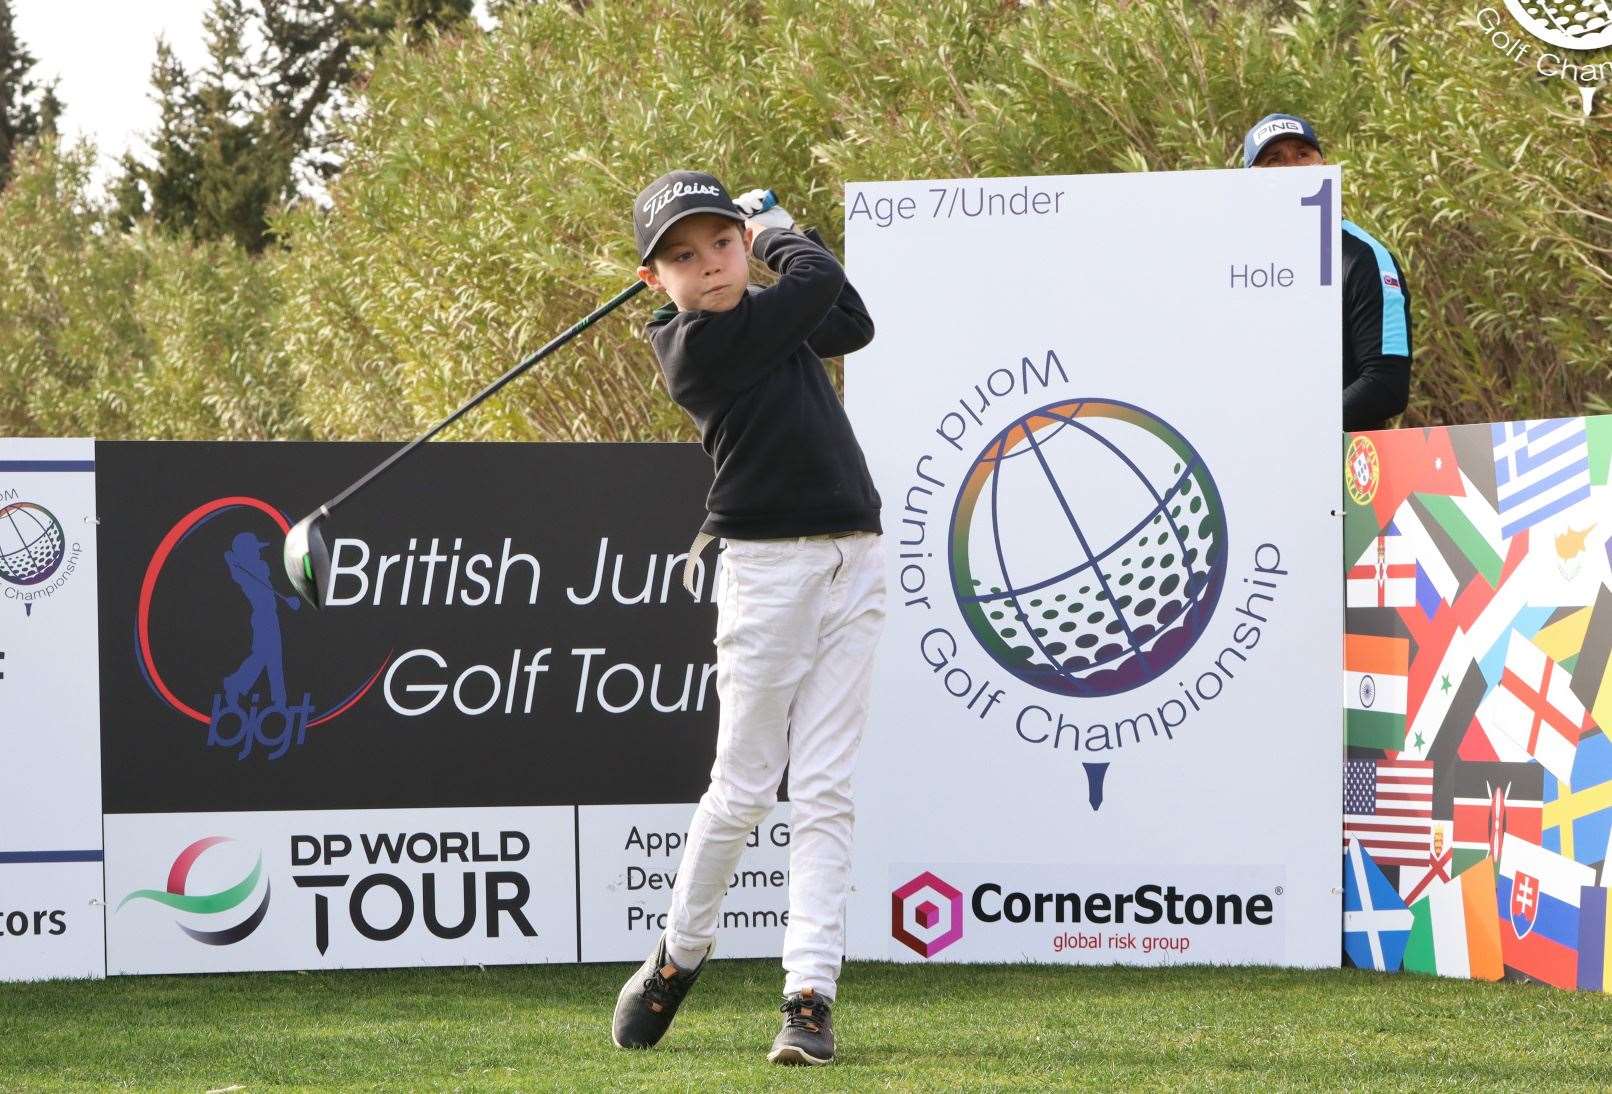 Elijah Gibbons teeing off at the 2023 World Junior Golf Championship at the Amendoeira resort in the Algarve, Portugal, with the event run by the British Junior Golf Tour